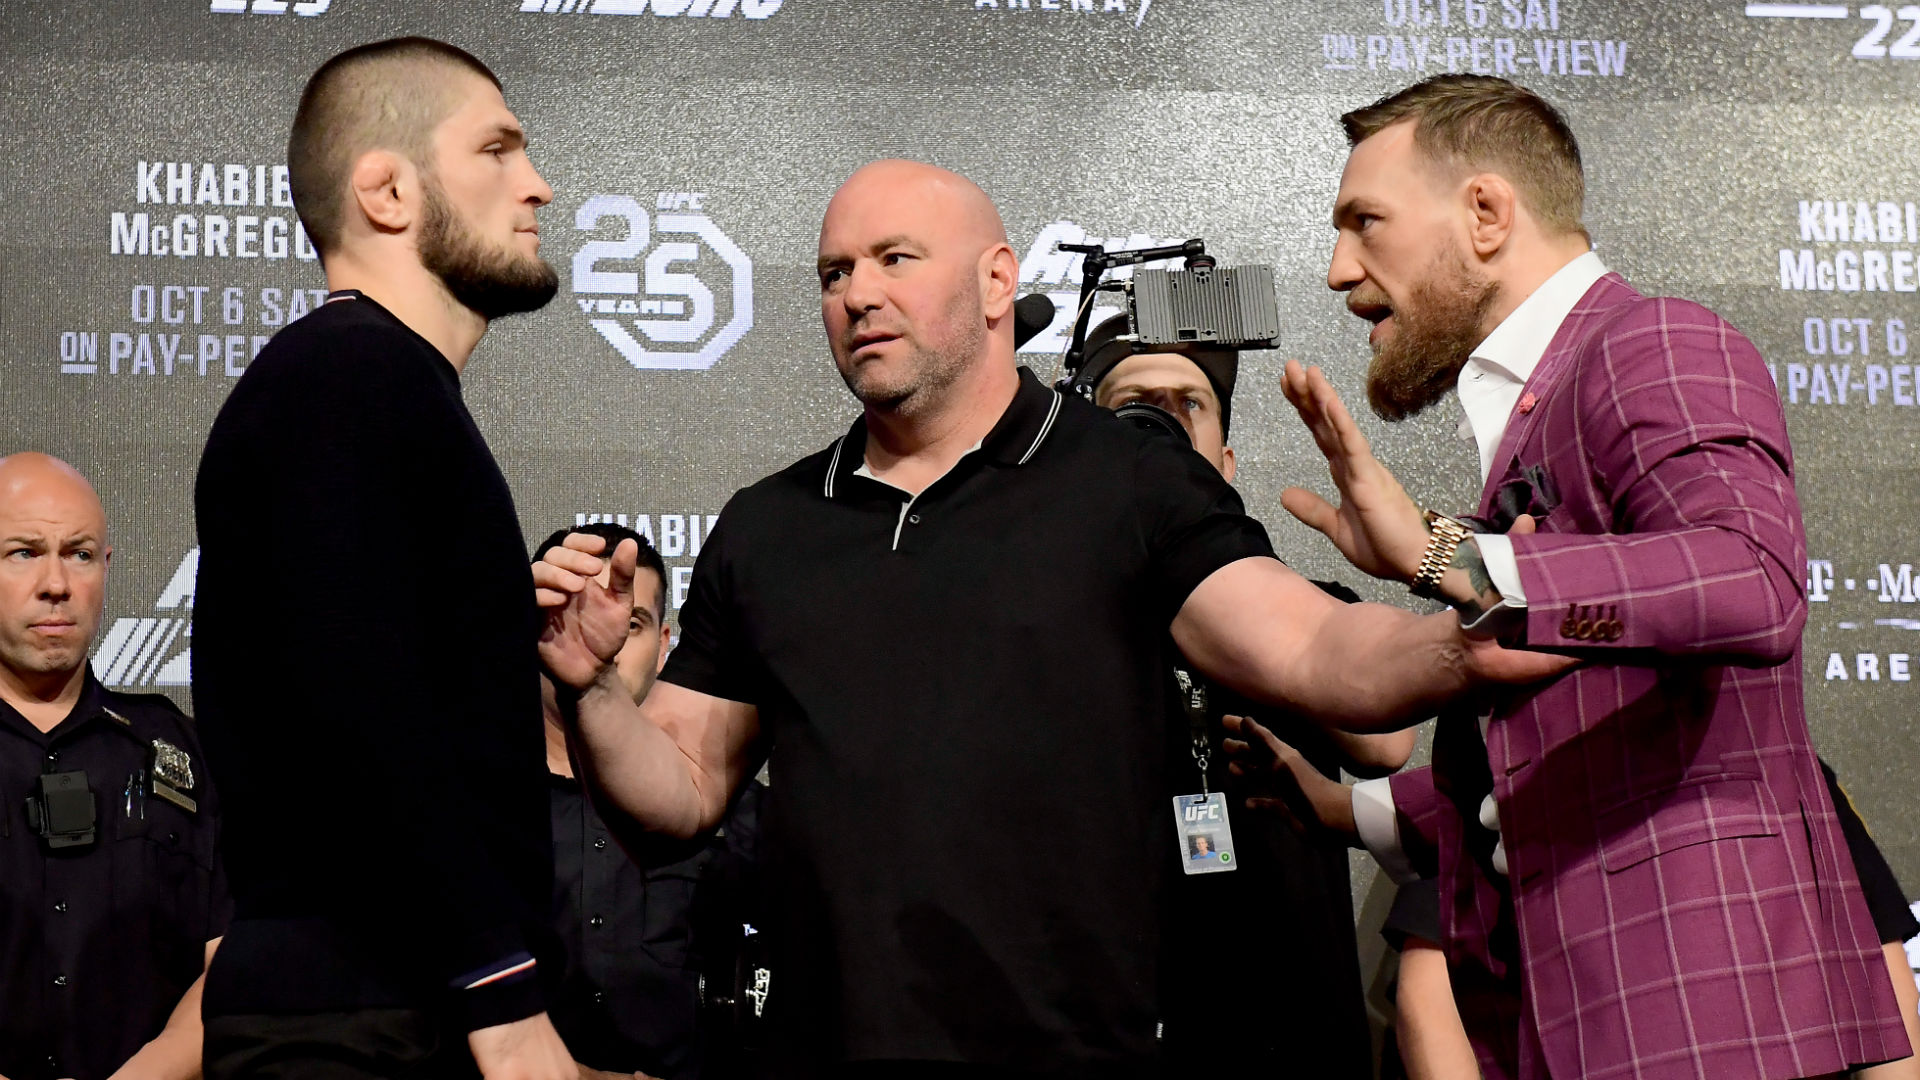 UFC 229: Khabib vs. McGregor fight date, PPV price, how to watch and live stream | MMA ...